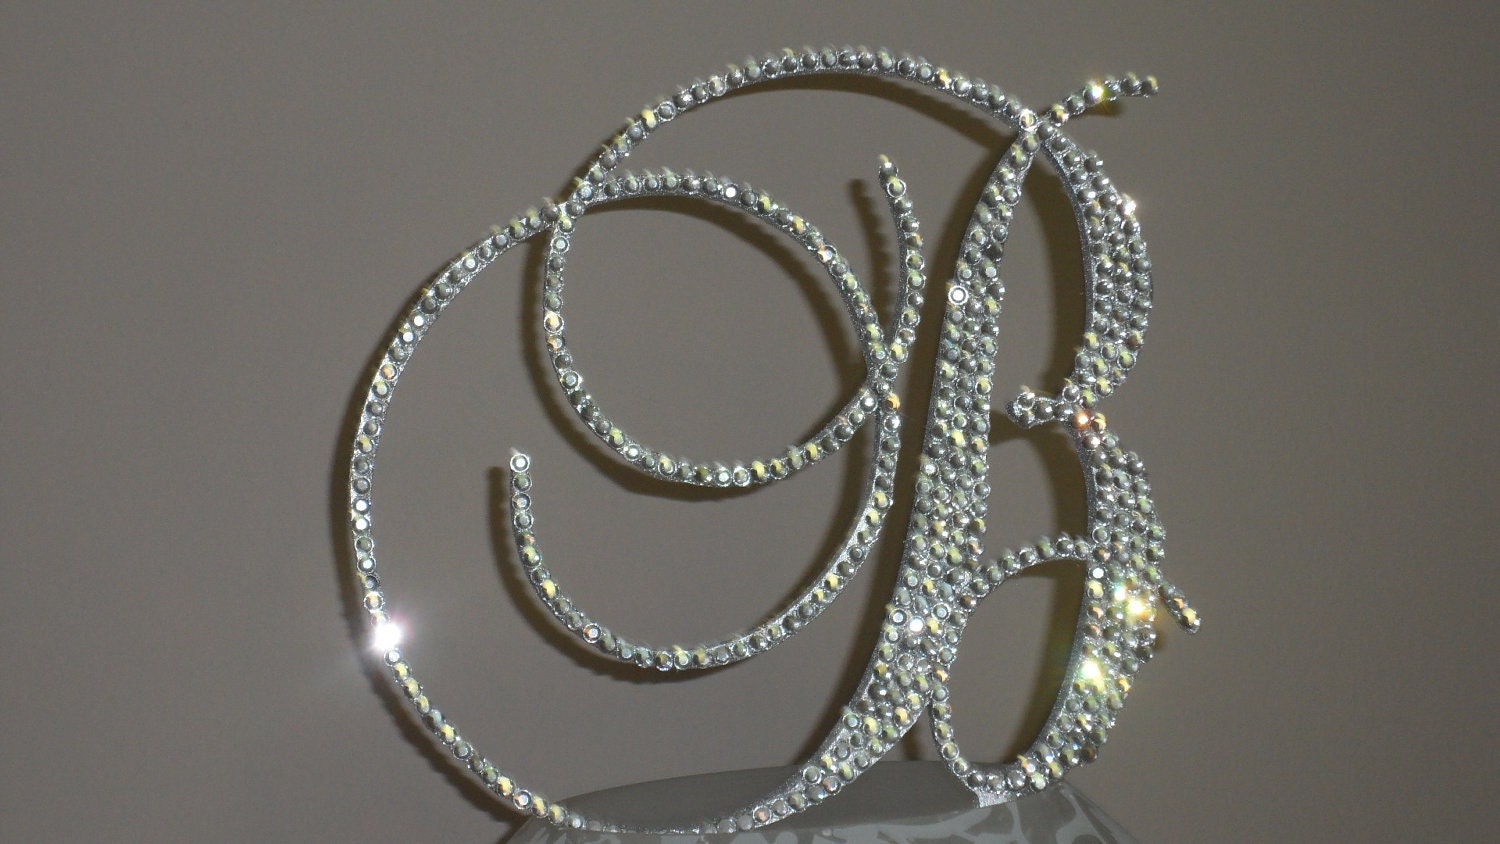 Gorgeous Swarovski Crystal Cake Toppers 5 By